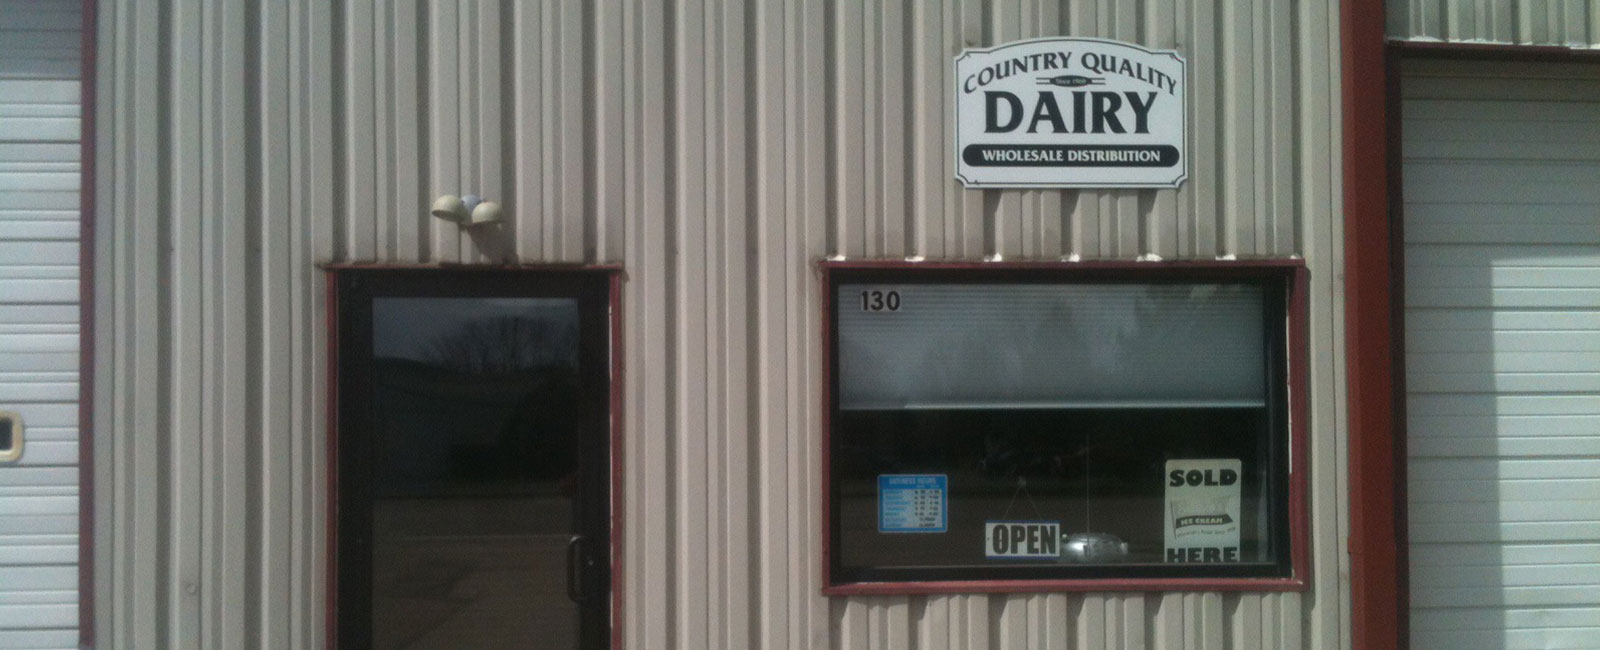 Country Quality Dairy
